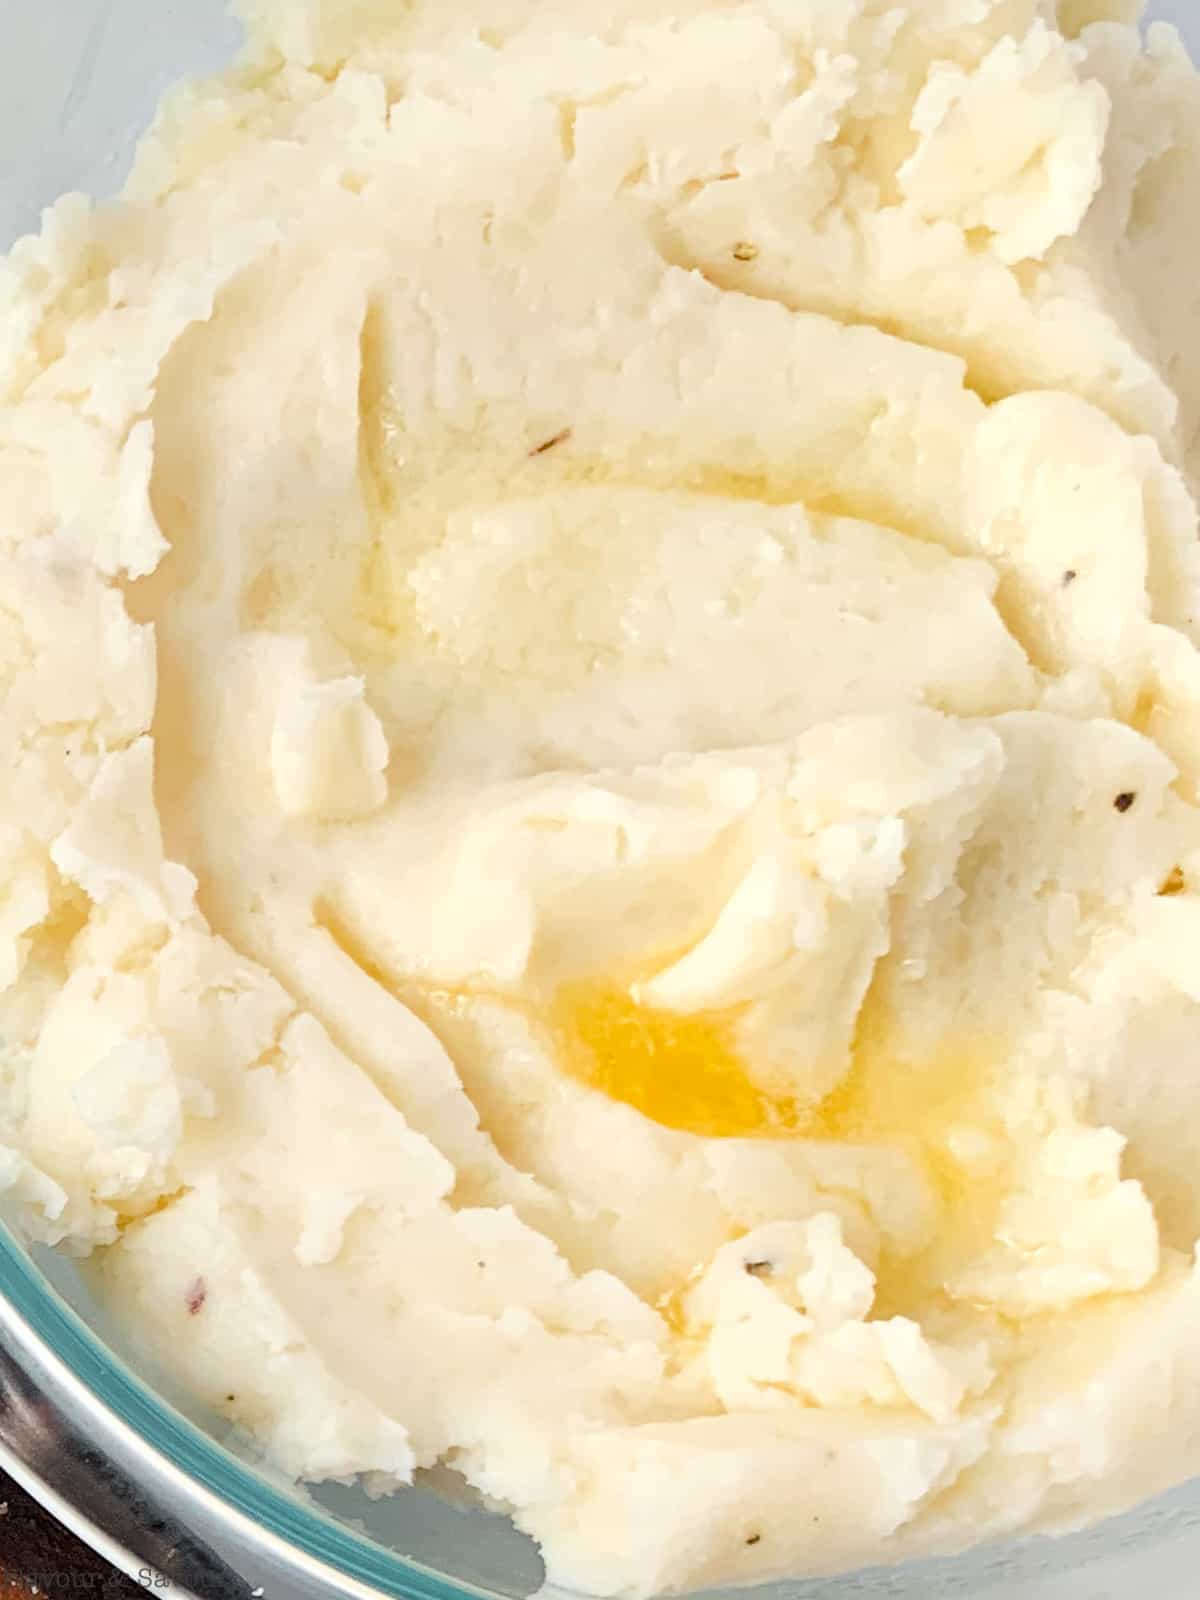 Mashed potatoes with melted butter